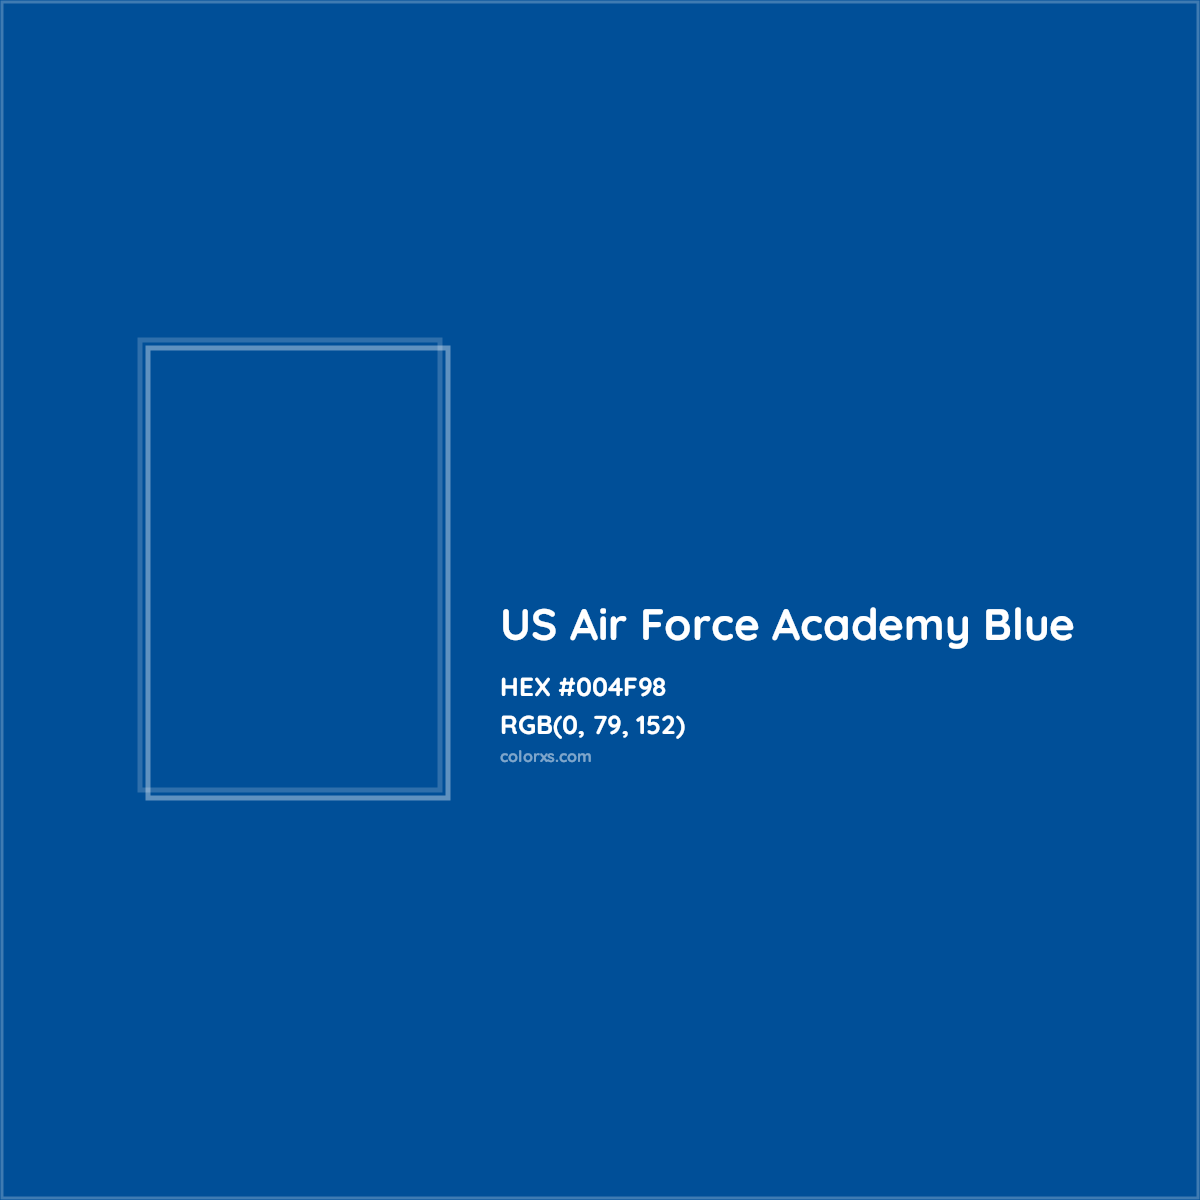 HEX #004F98 US Air Force Academy Blue Color - Color Code